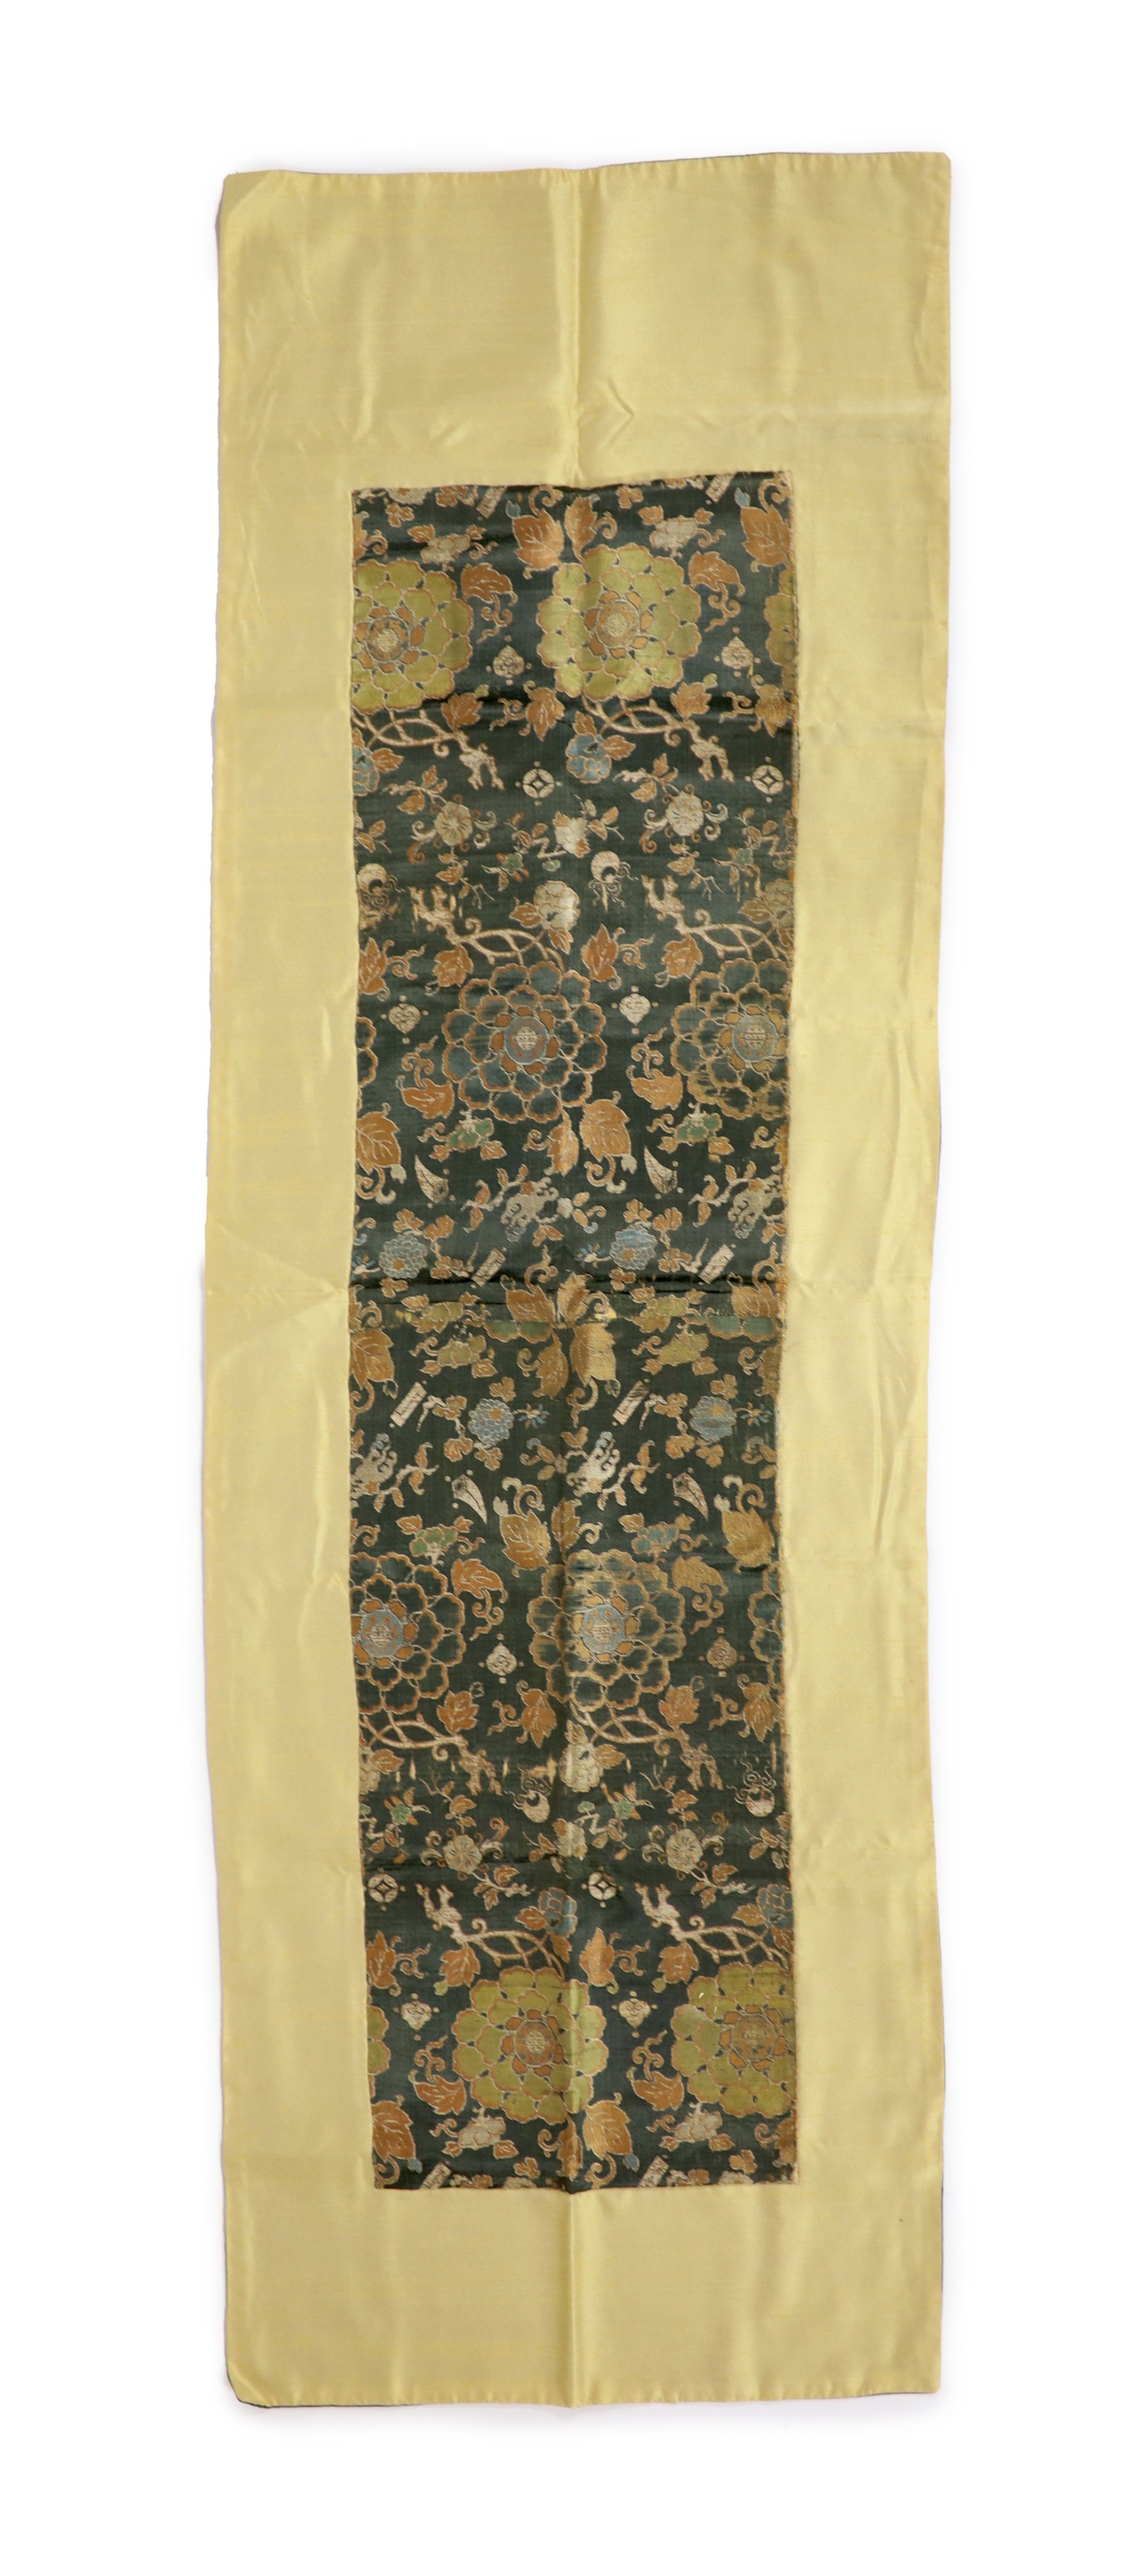 A Chinese brocade panel, 17th/18th century, Total size 169cm x 54cm